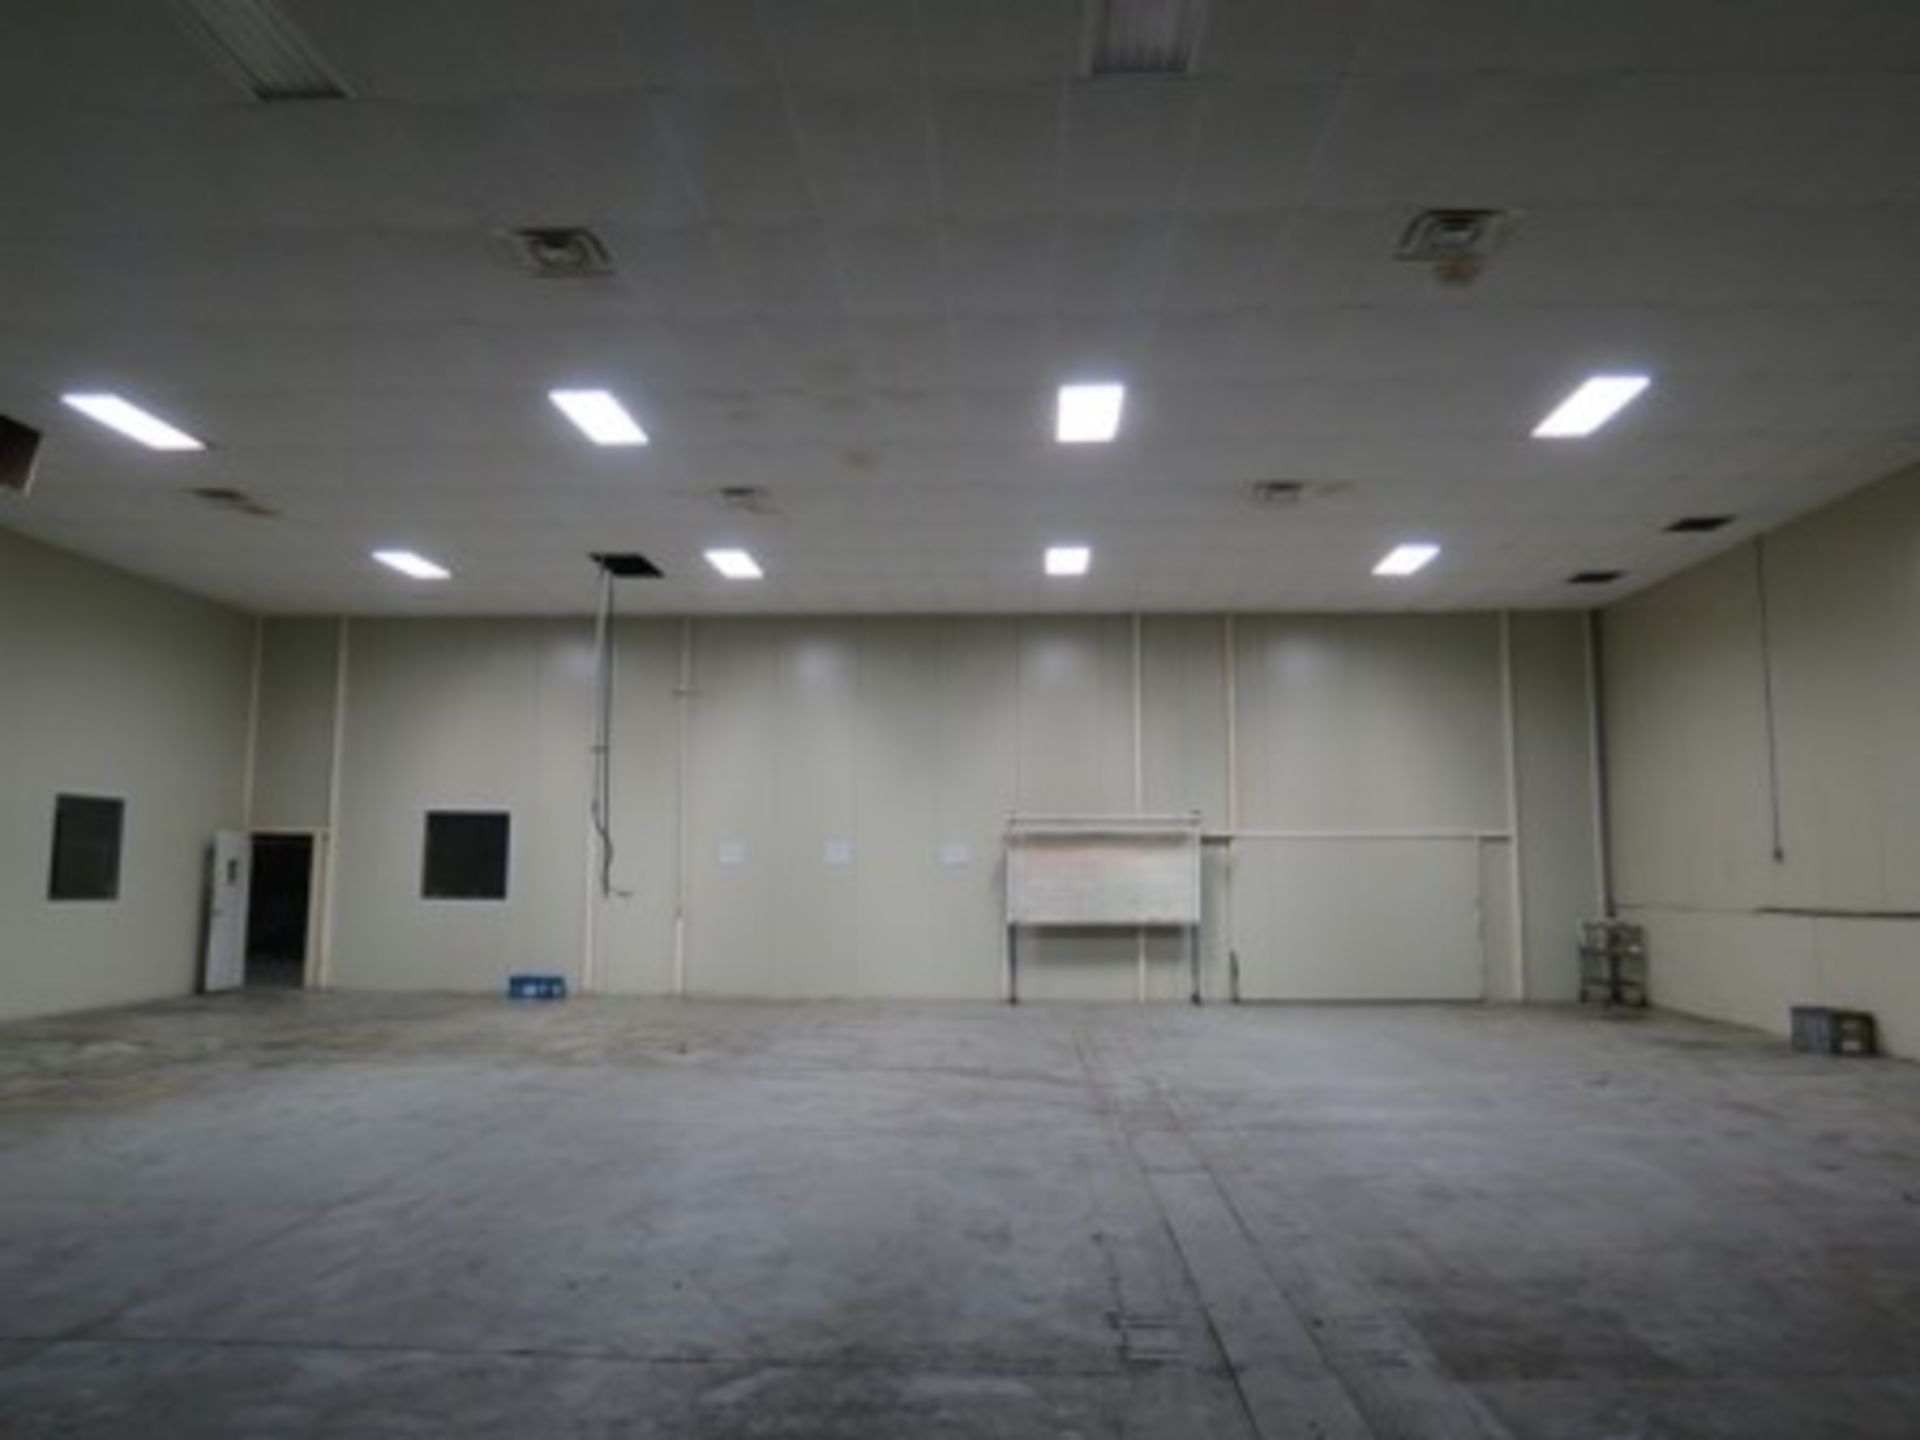 Metal room for Cleanroom, 18.3 x 36.6 x 5 m., (2) gates, (2) doors, (4)windows, celling and lamps. - Image 7 of 15